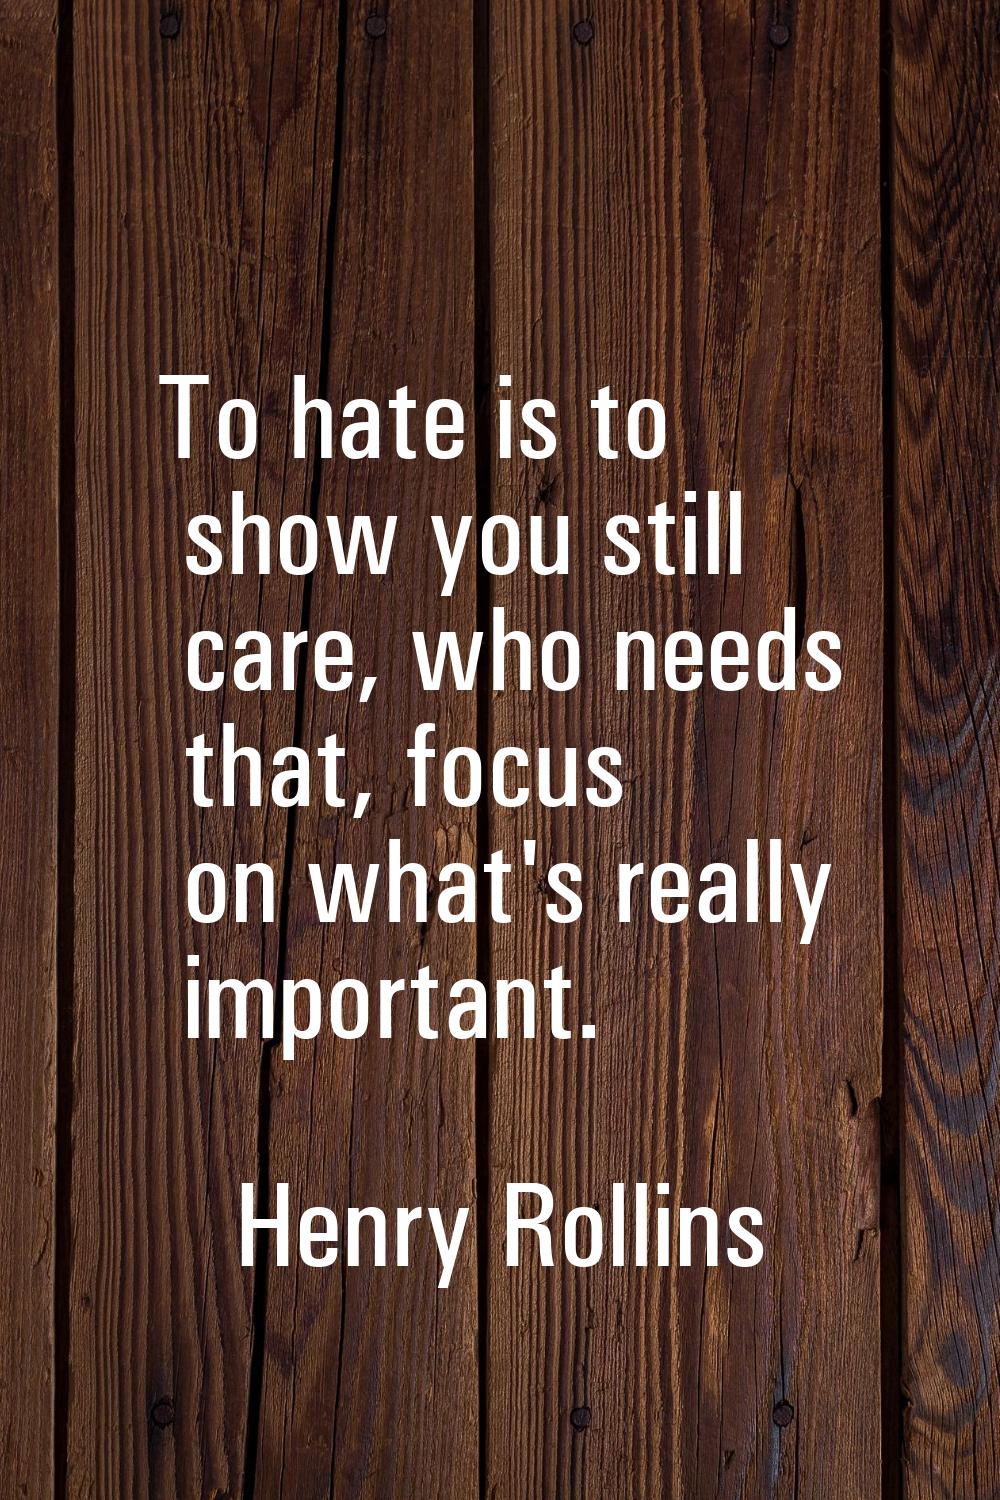 To hate is to show you still care, who needs that, focus on what's really important.